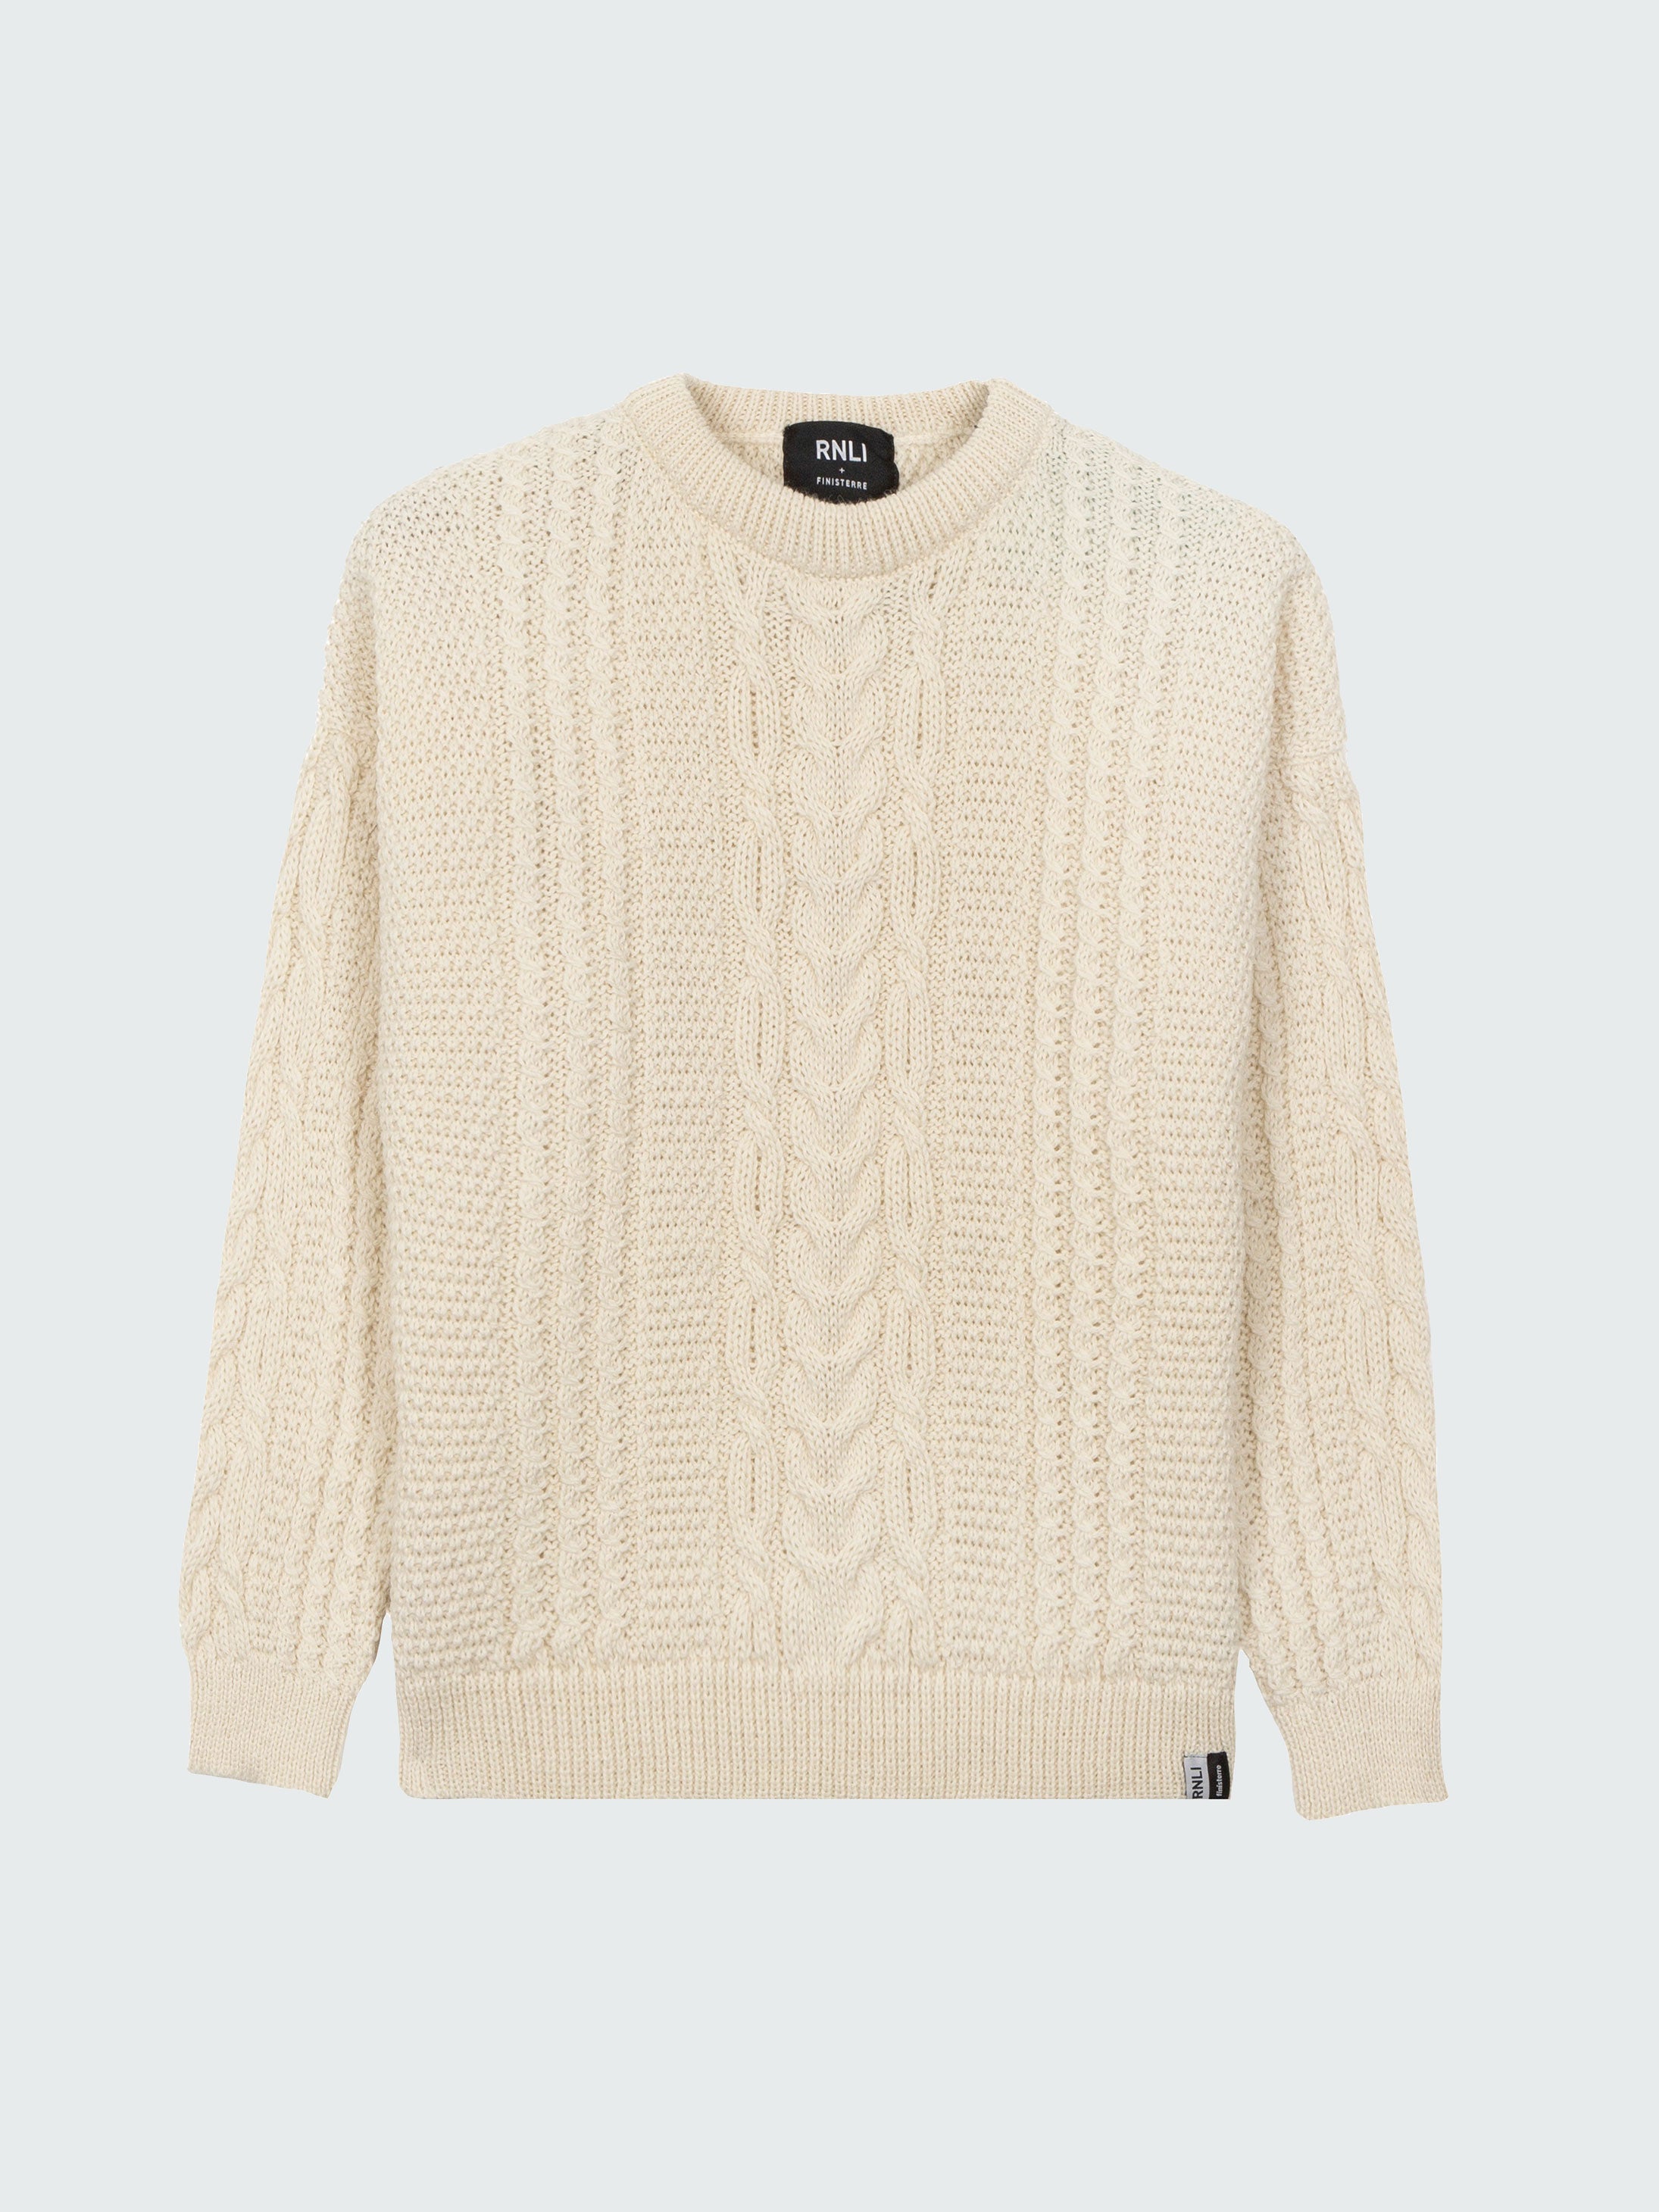 Women's Cable Knit Jumper (Cream) | RNLI + Finisterre